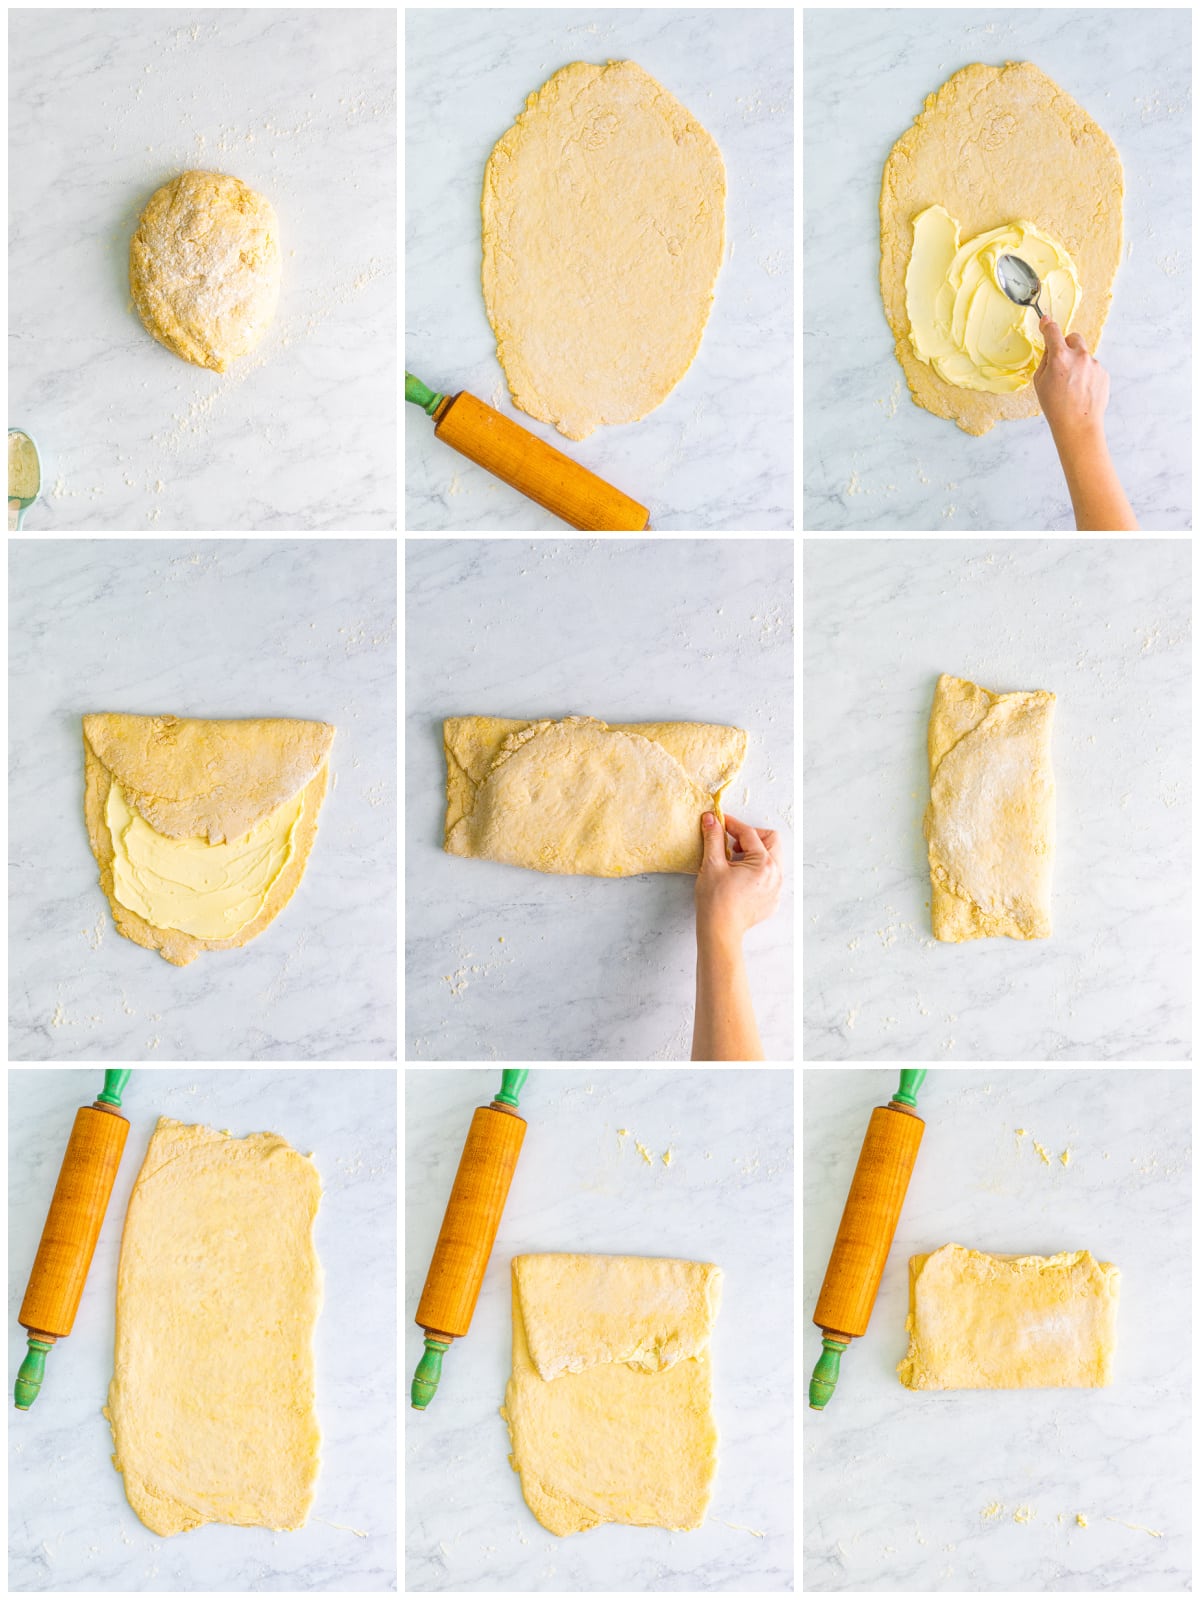 Step by step photos on how to fold dough for the Soft Cinnamon Rolls.